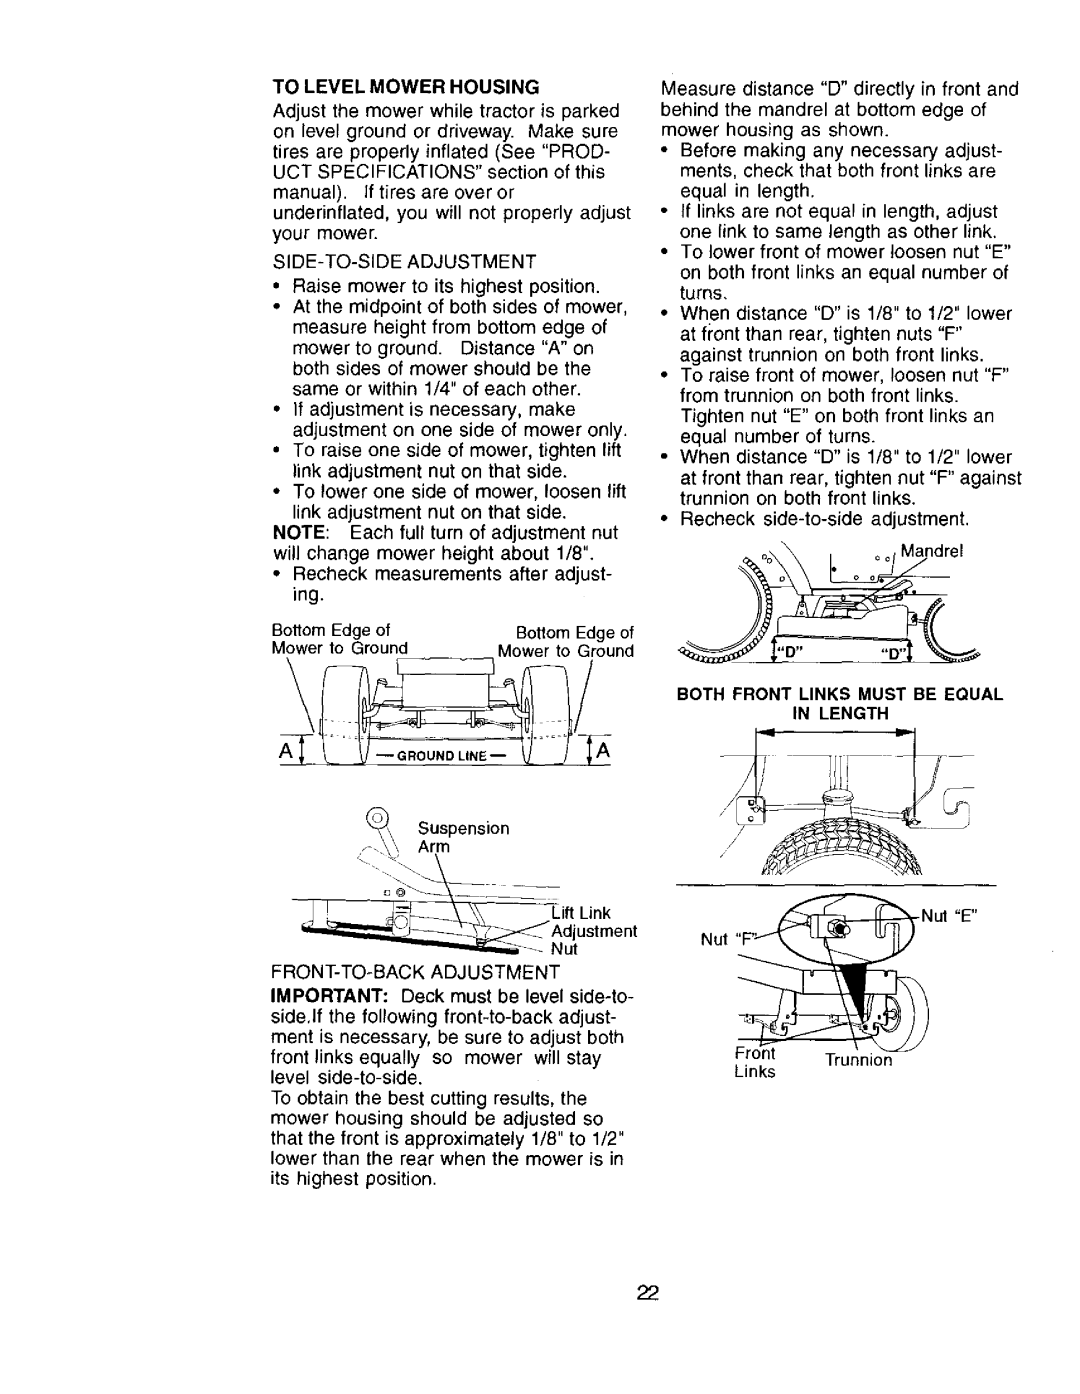 Craftsman 917.272057 owner manual To Level Mower Housing, Both Front Links Must Be Equal In Length 